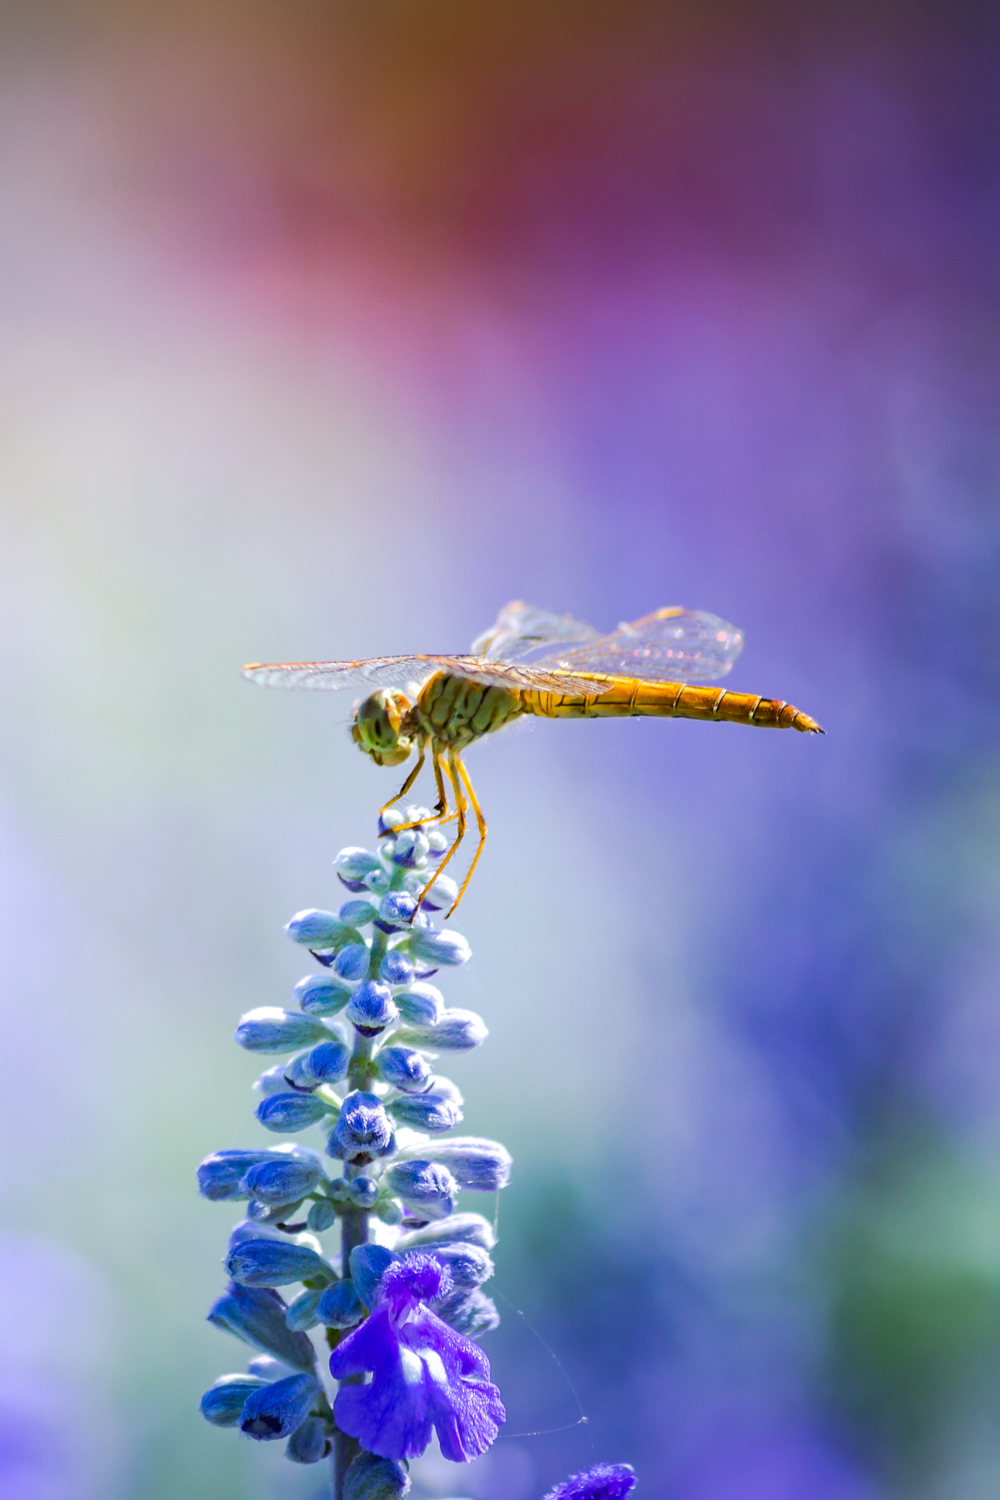 How to interpret seeing a dragonfly in real life or in your dreams